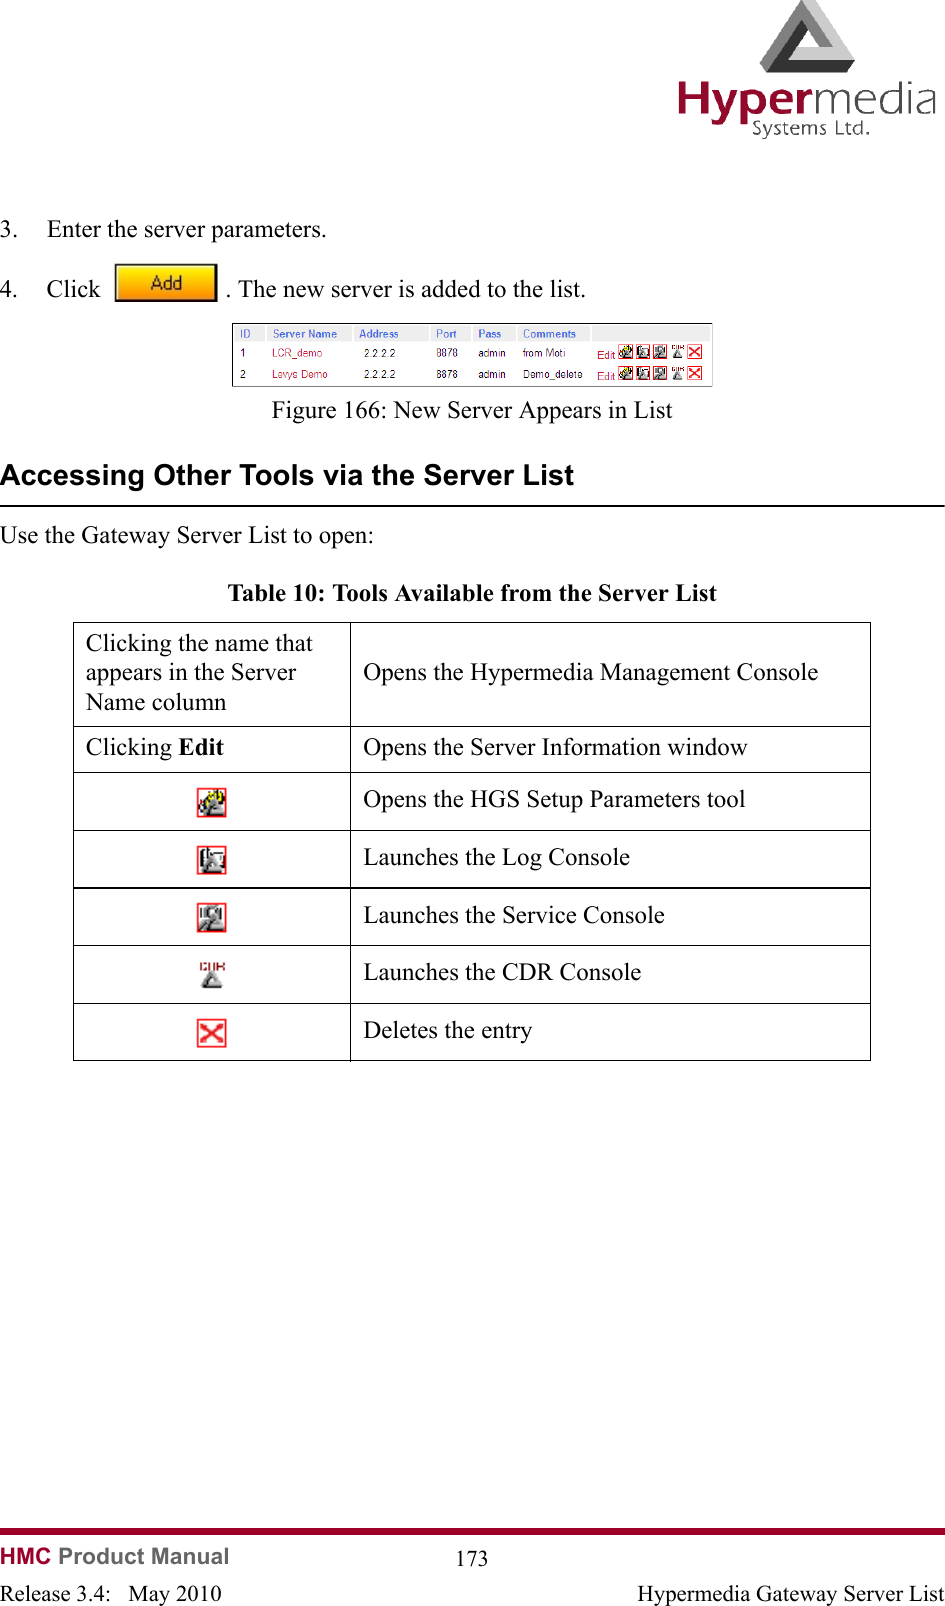 HMC Product Manual  173Release 3.4:   May 2010 Hypermedia Gateway Server List3. Enter the server parameters.4. Click  . The new server is added to the list.                Figure 166: New Server Appears in ListAccessing Other Tools via the Server ListUse the Gateway Server List to open:                 Table 10: Tools Available from the Server ListClicking the name that appears in the Server Name columnOpens the Hypermedia Management ConsoleClicking Edit Opens the Server Information windowOpens the HGS Setup Parameters toolLaunches the Log ConsoleLaunches the Service ConsoleLaunches the CDR ConsoleDeletes the entry